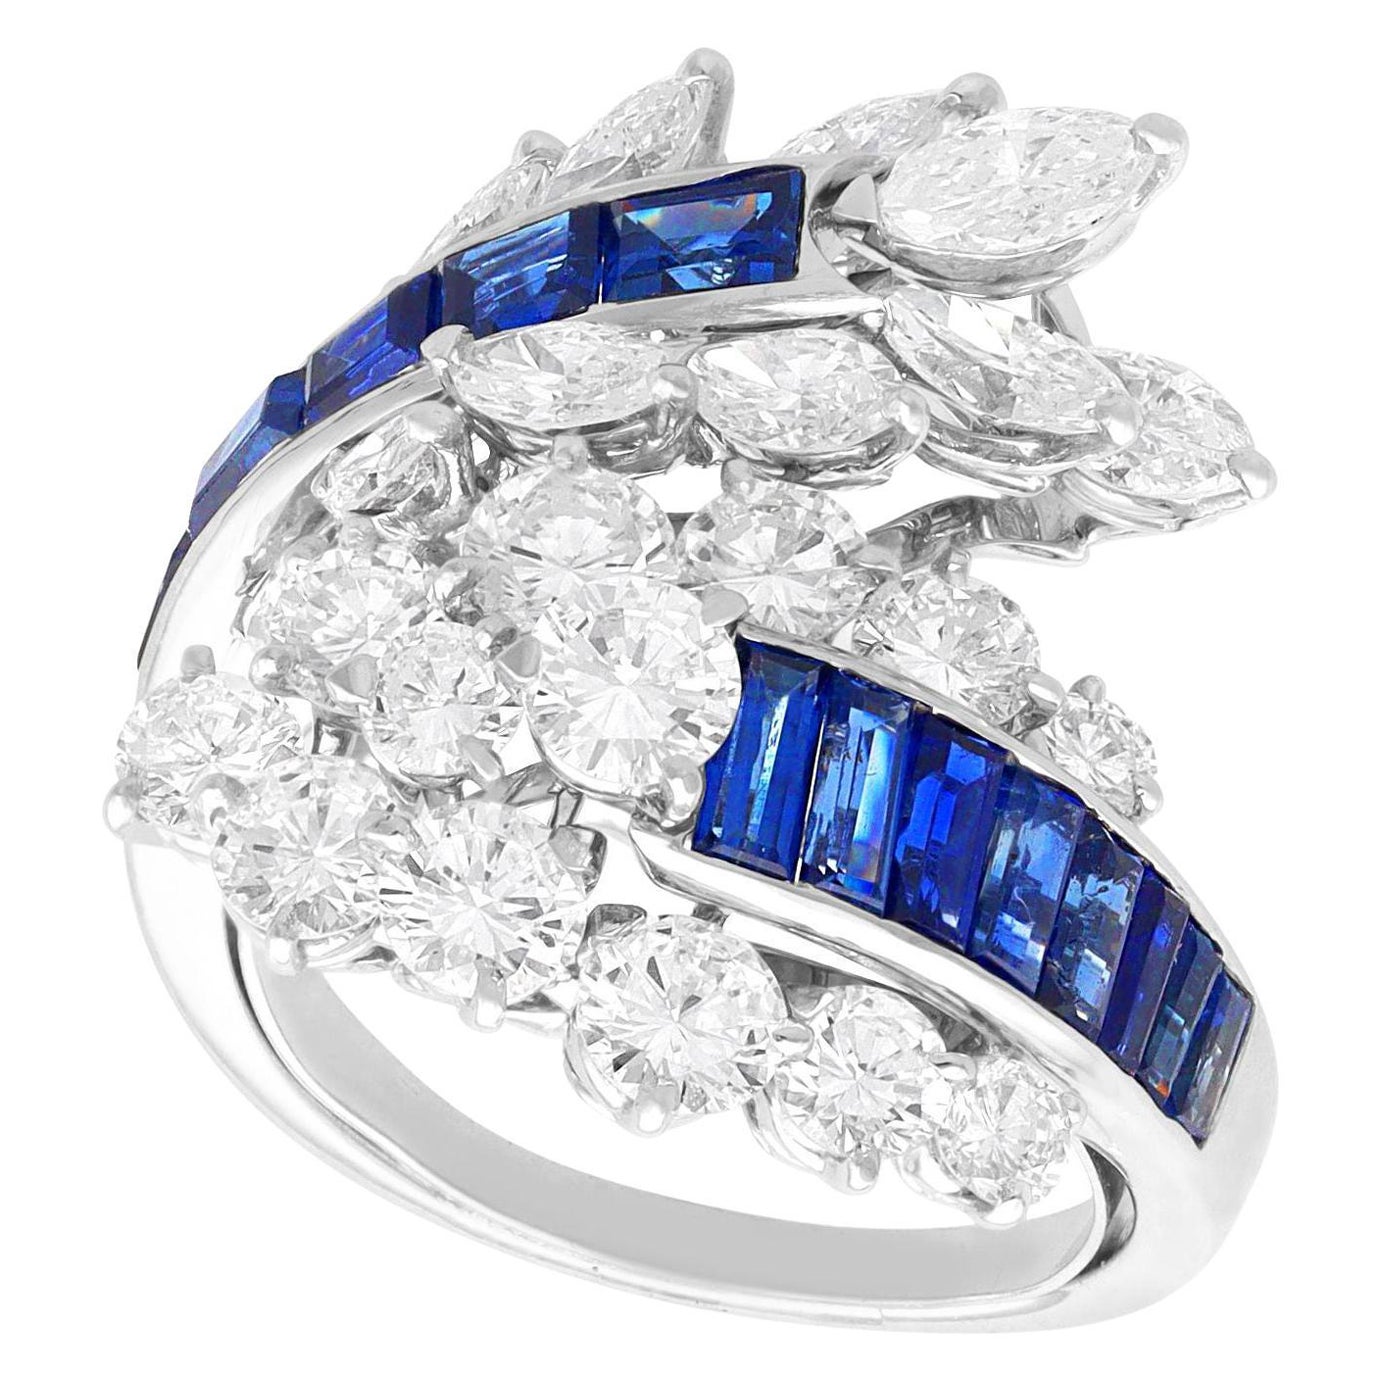 Vintage 1.42ct Sapphire and 3.22ct Diamond White Gold Cocktail Ring, circa 1980 For Sale